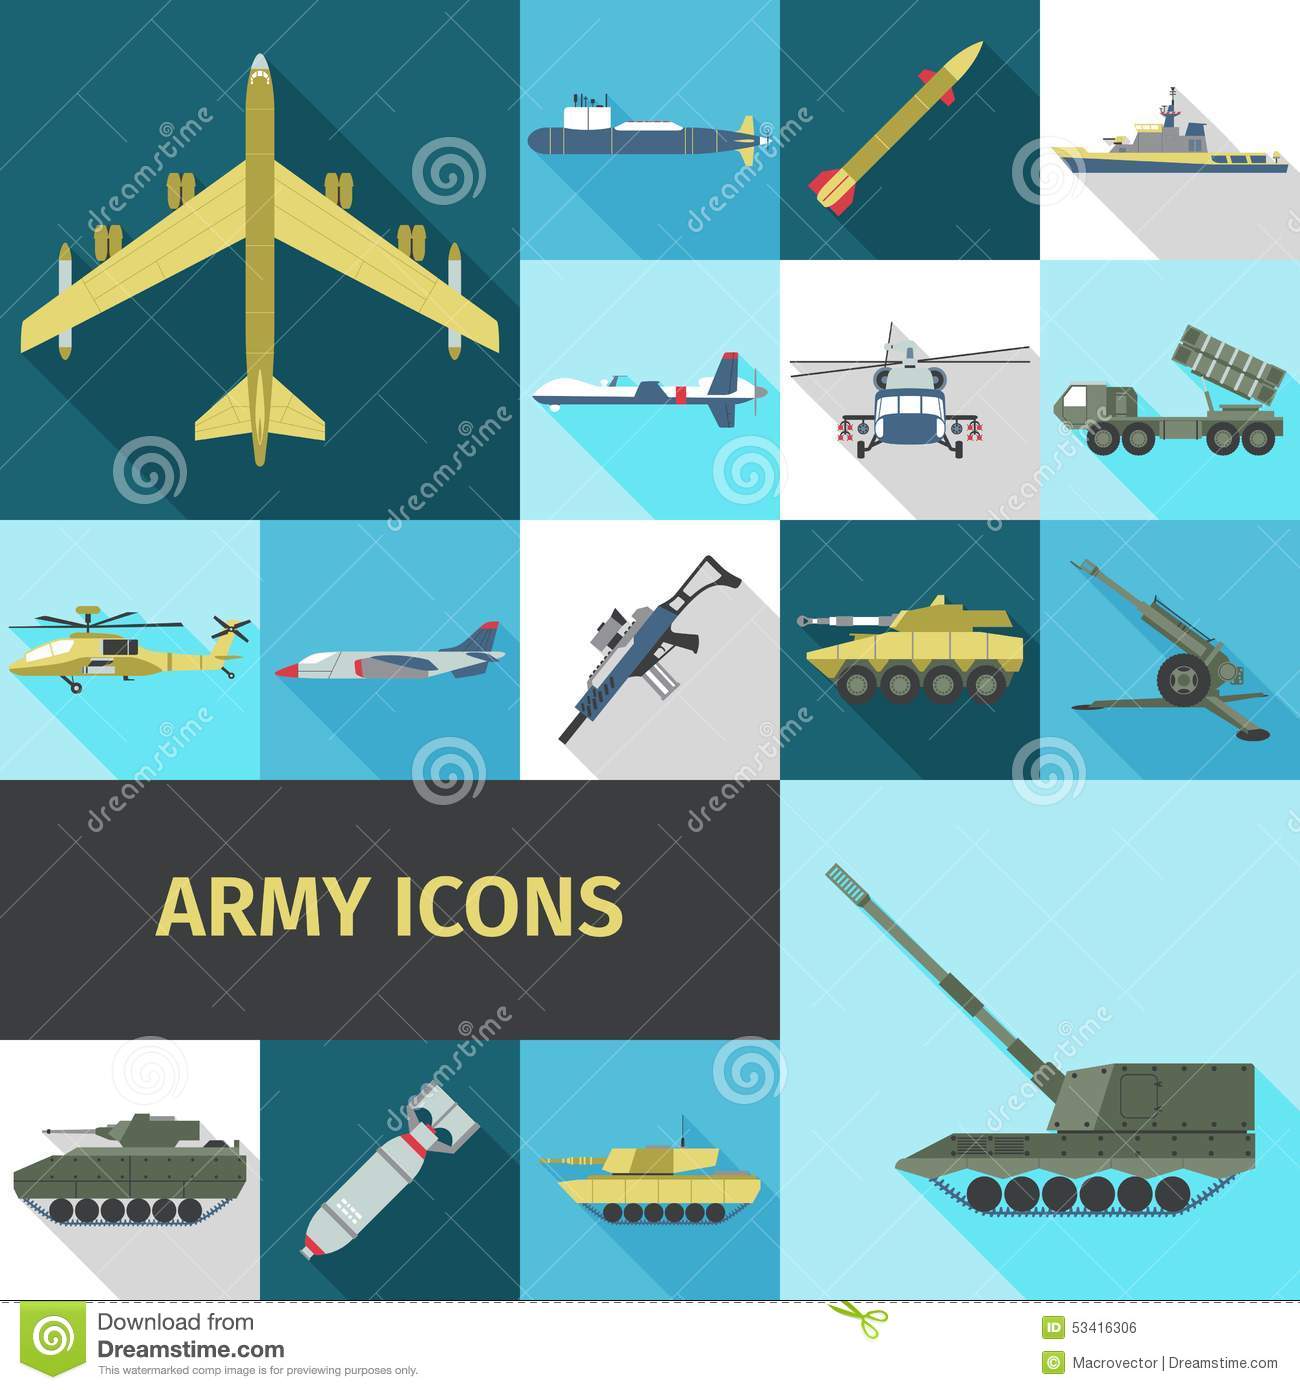 Army Helicopter Icons